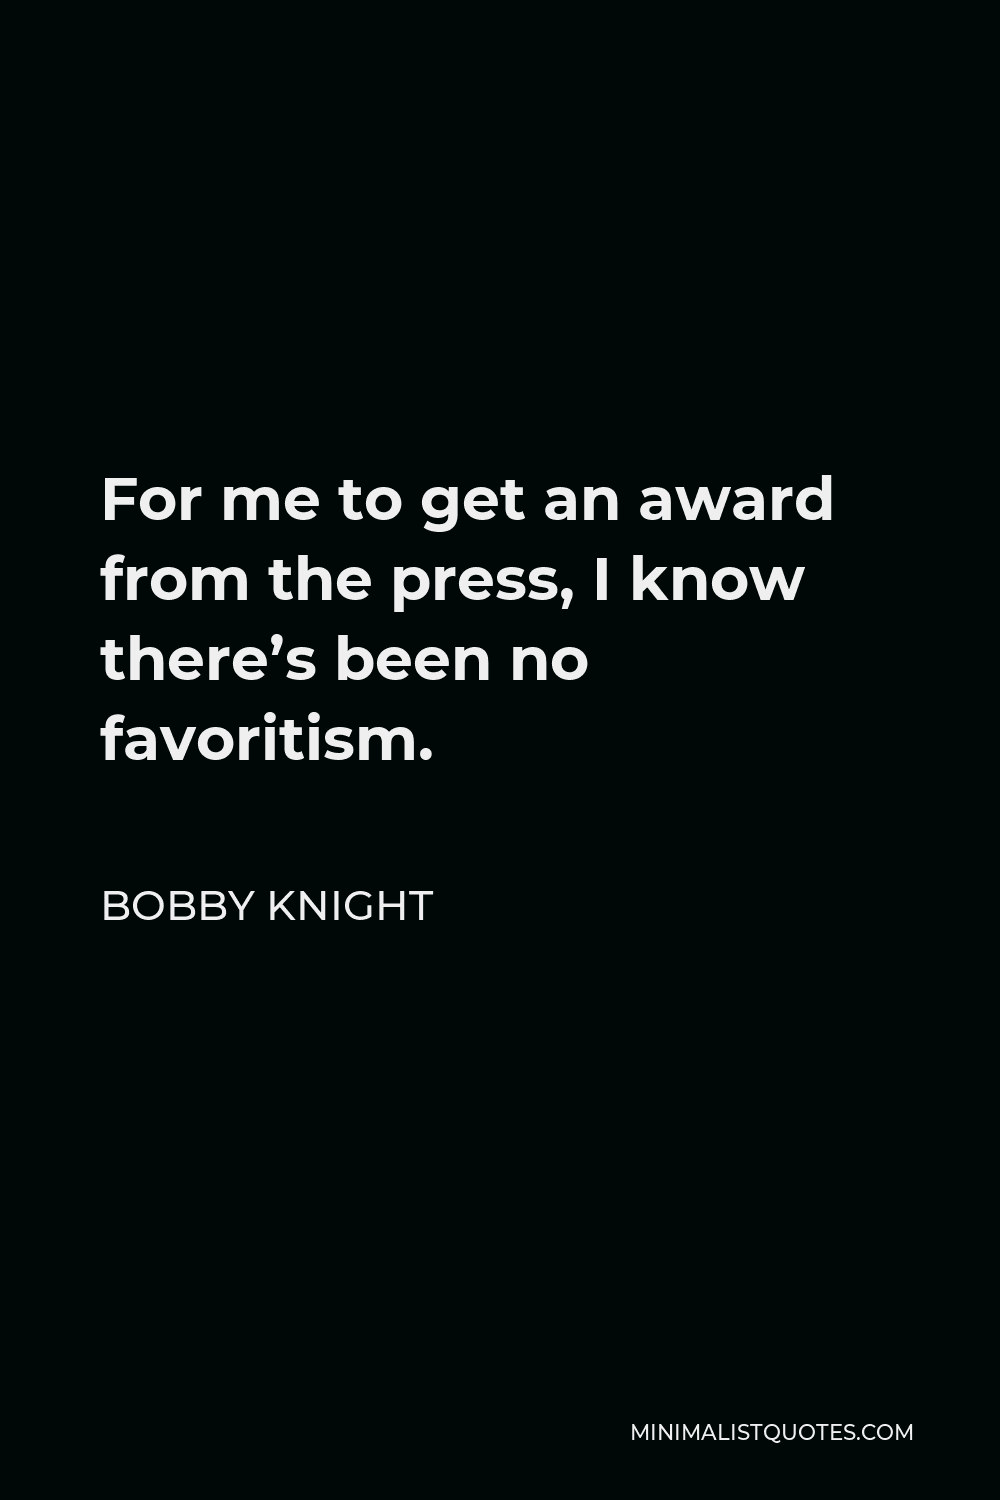 Bobby Knight Quote - For me to get an award from the press, I know there’s been no favoritism.